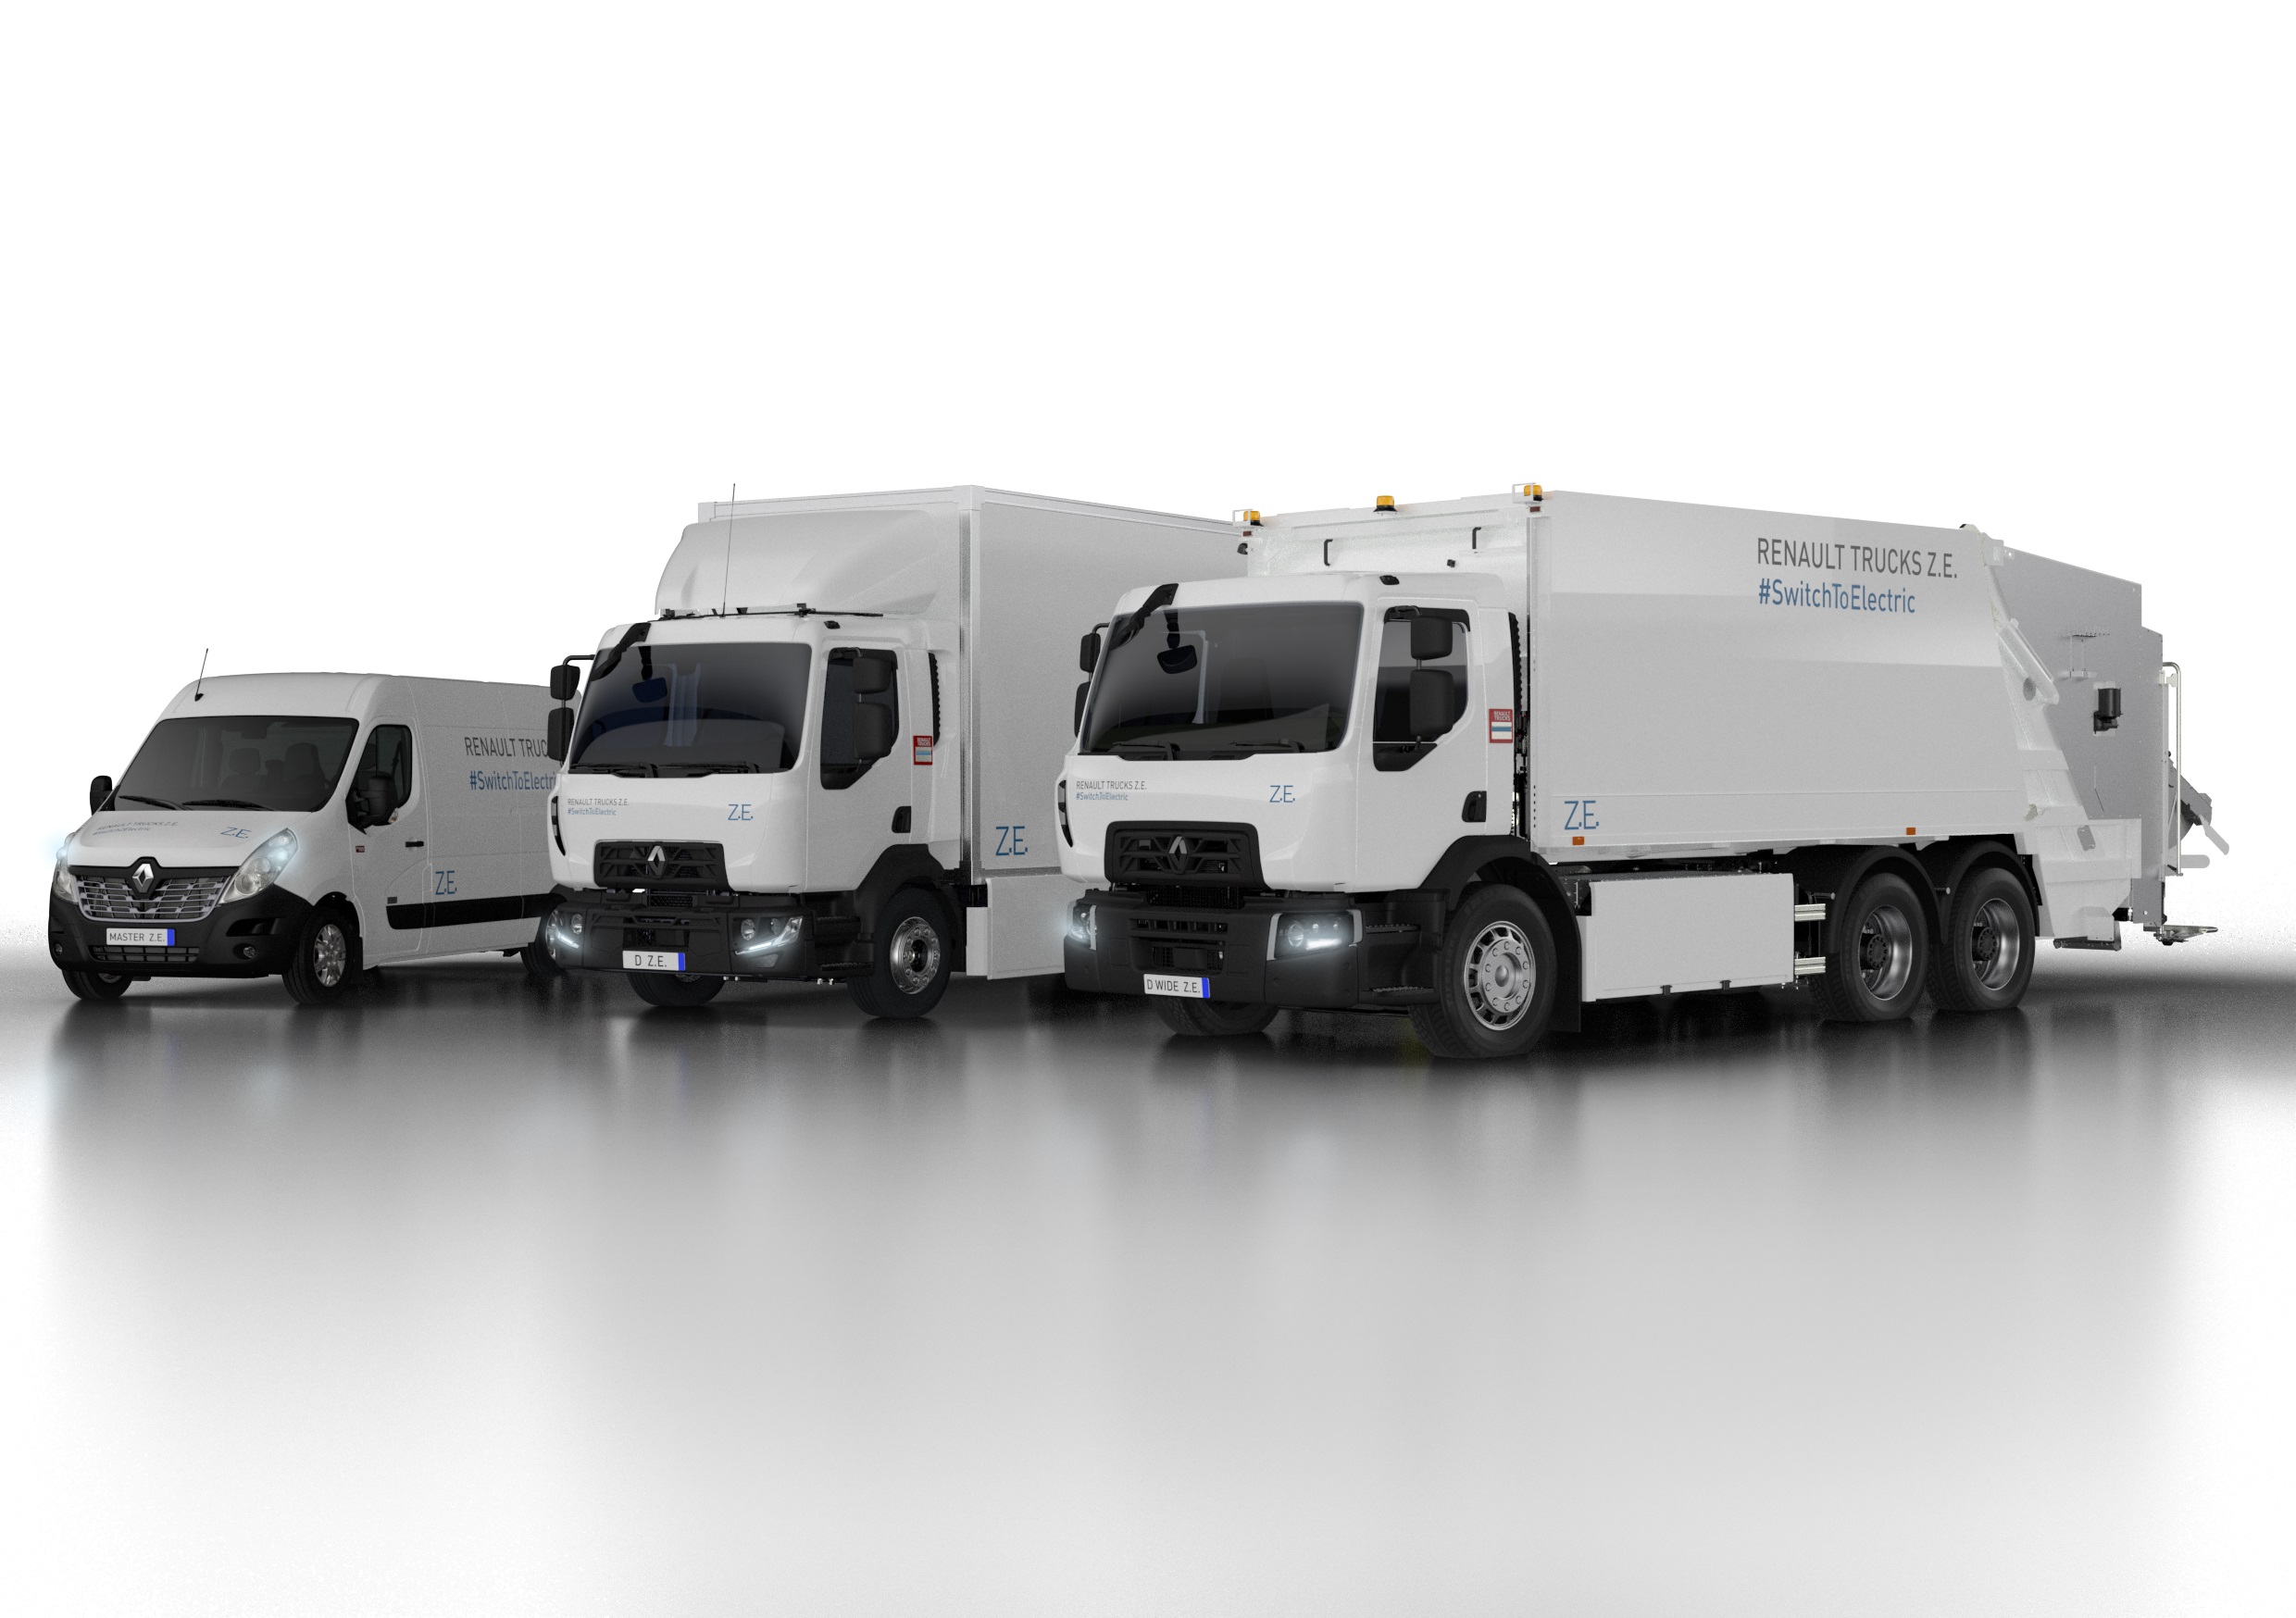 RENAULT TRUCKS RECORDS A 10 percent INCREASE IN INVOICED VEHICLES IN 2018